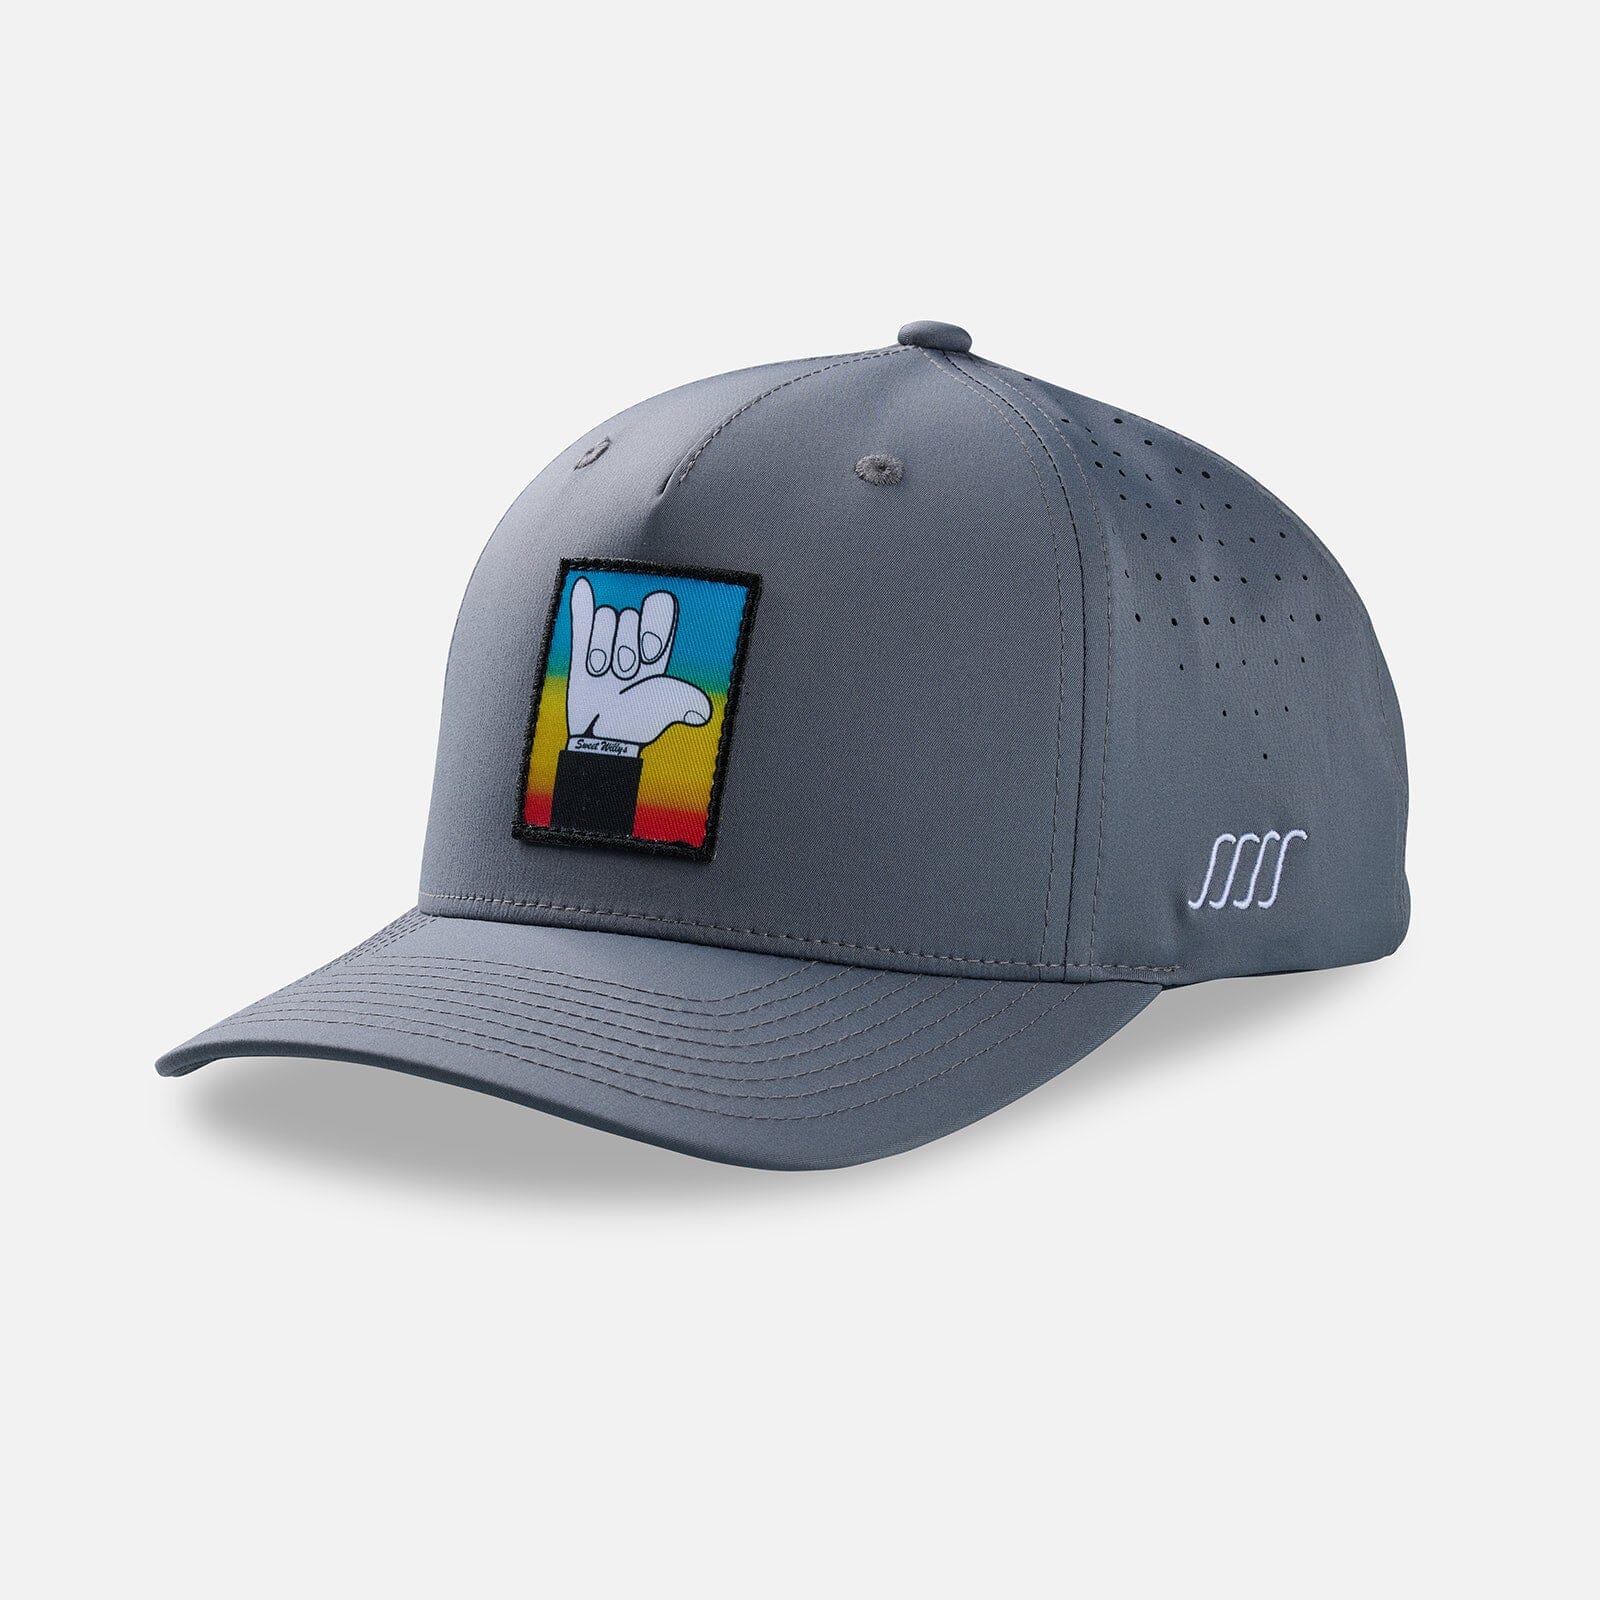 South Swell X Sweet Willy Patch Performance Hat Hats SOUTH SWELL Charcoal 